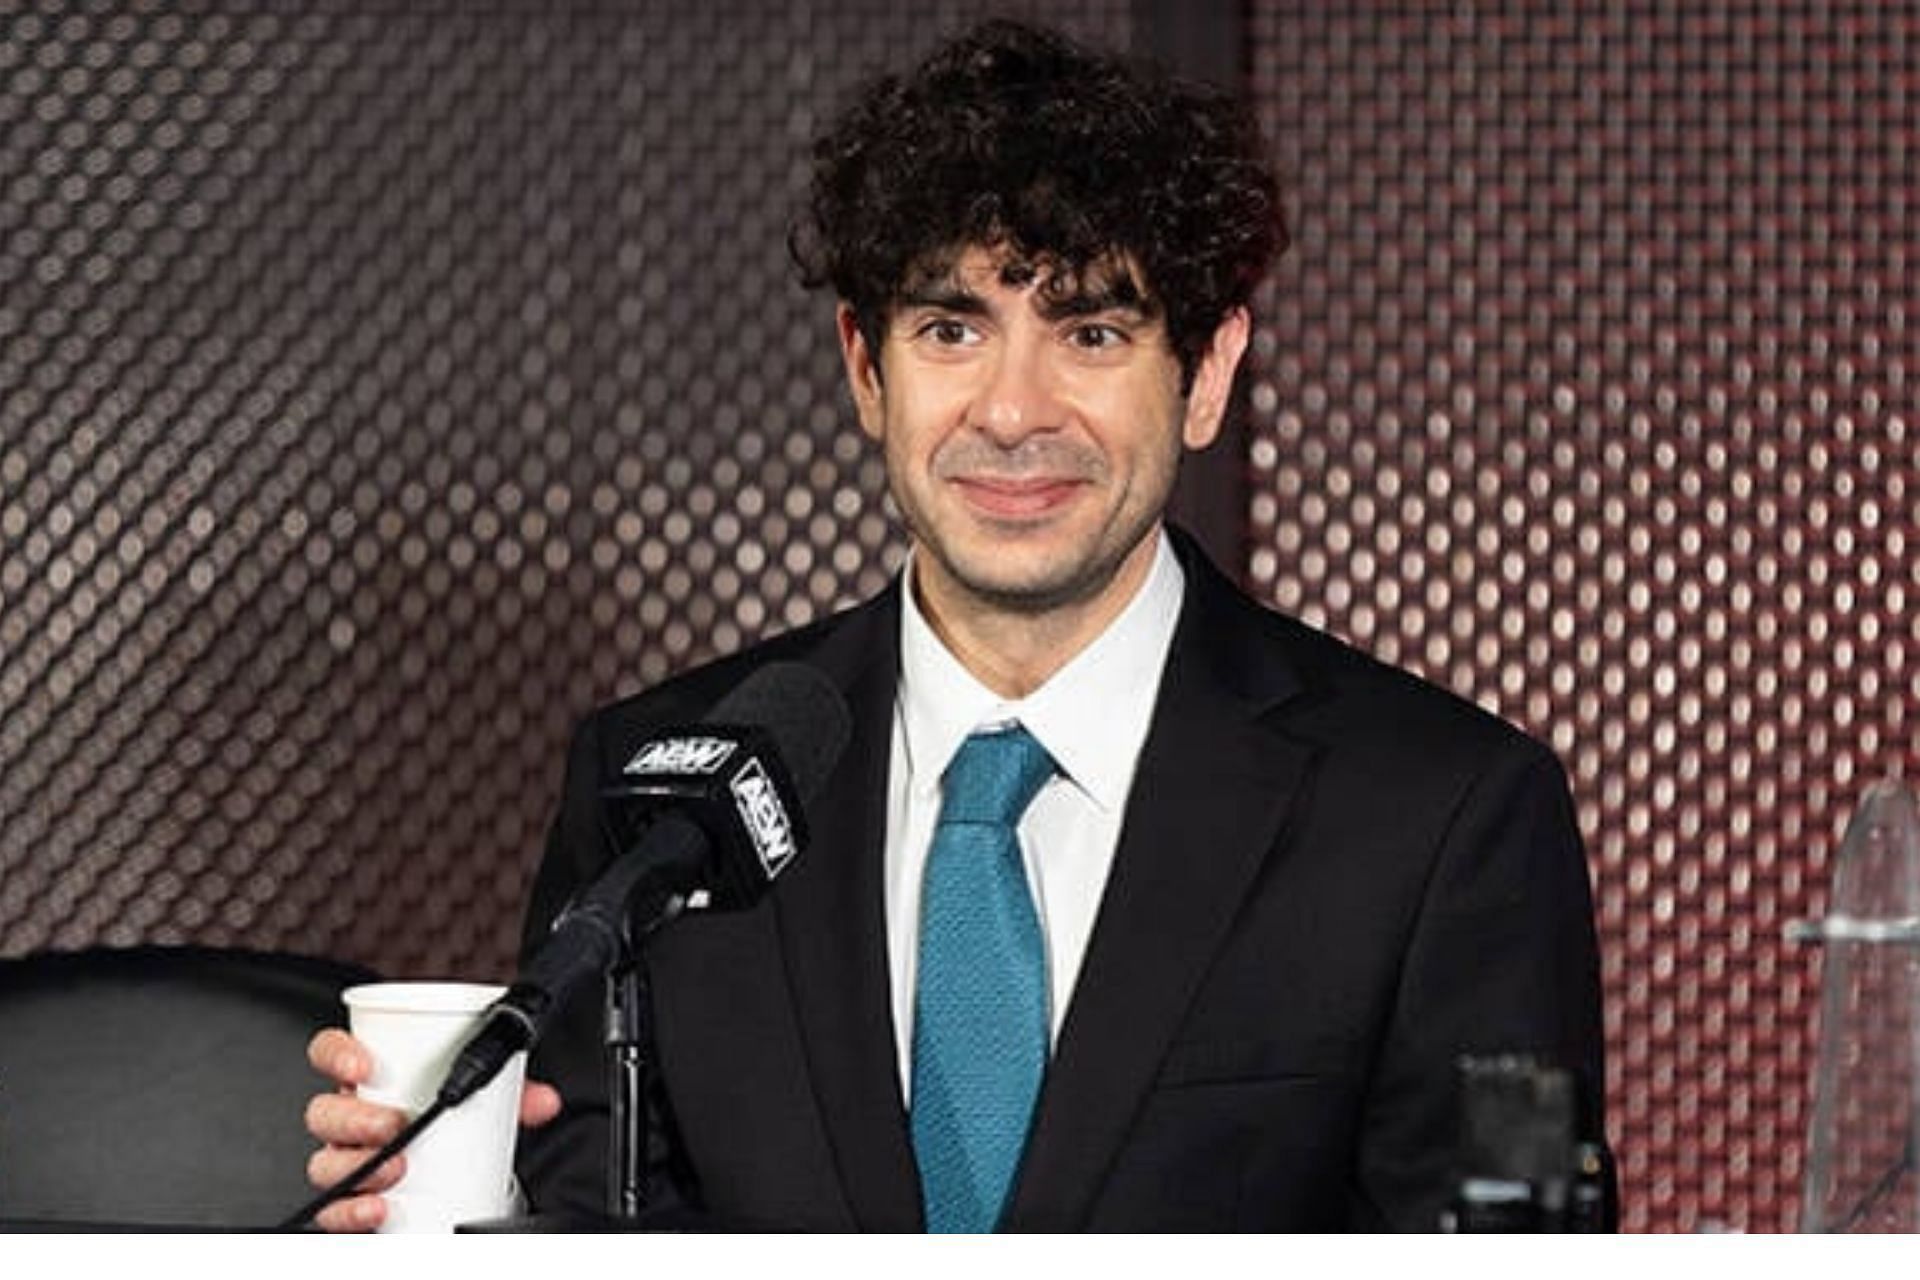 Tony Khan has got a clear message about booking from a WWE legend